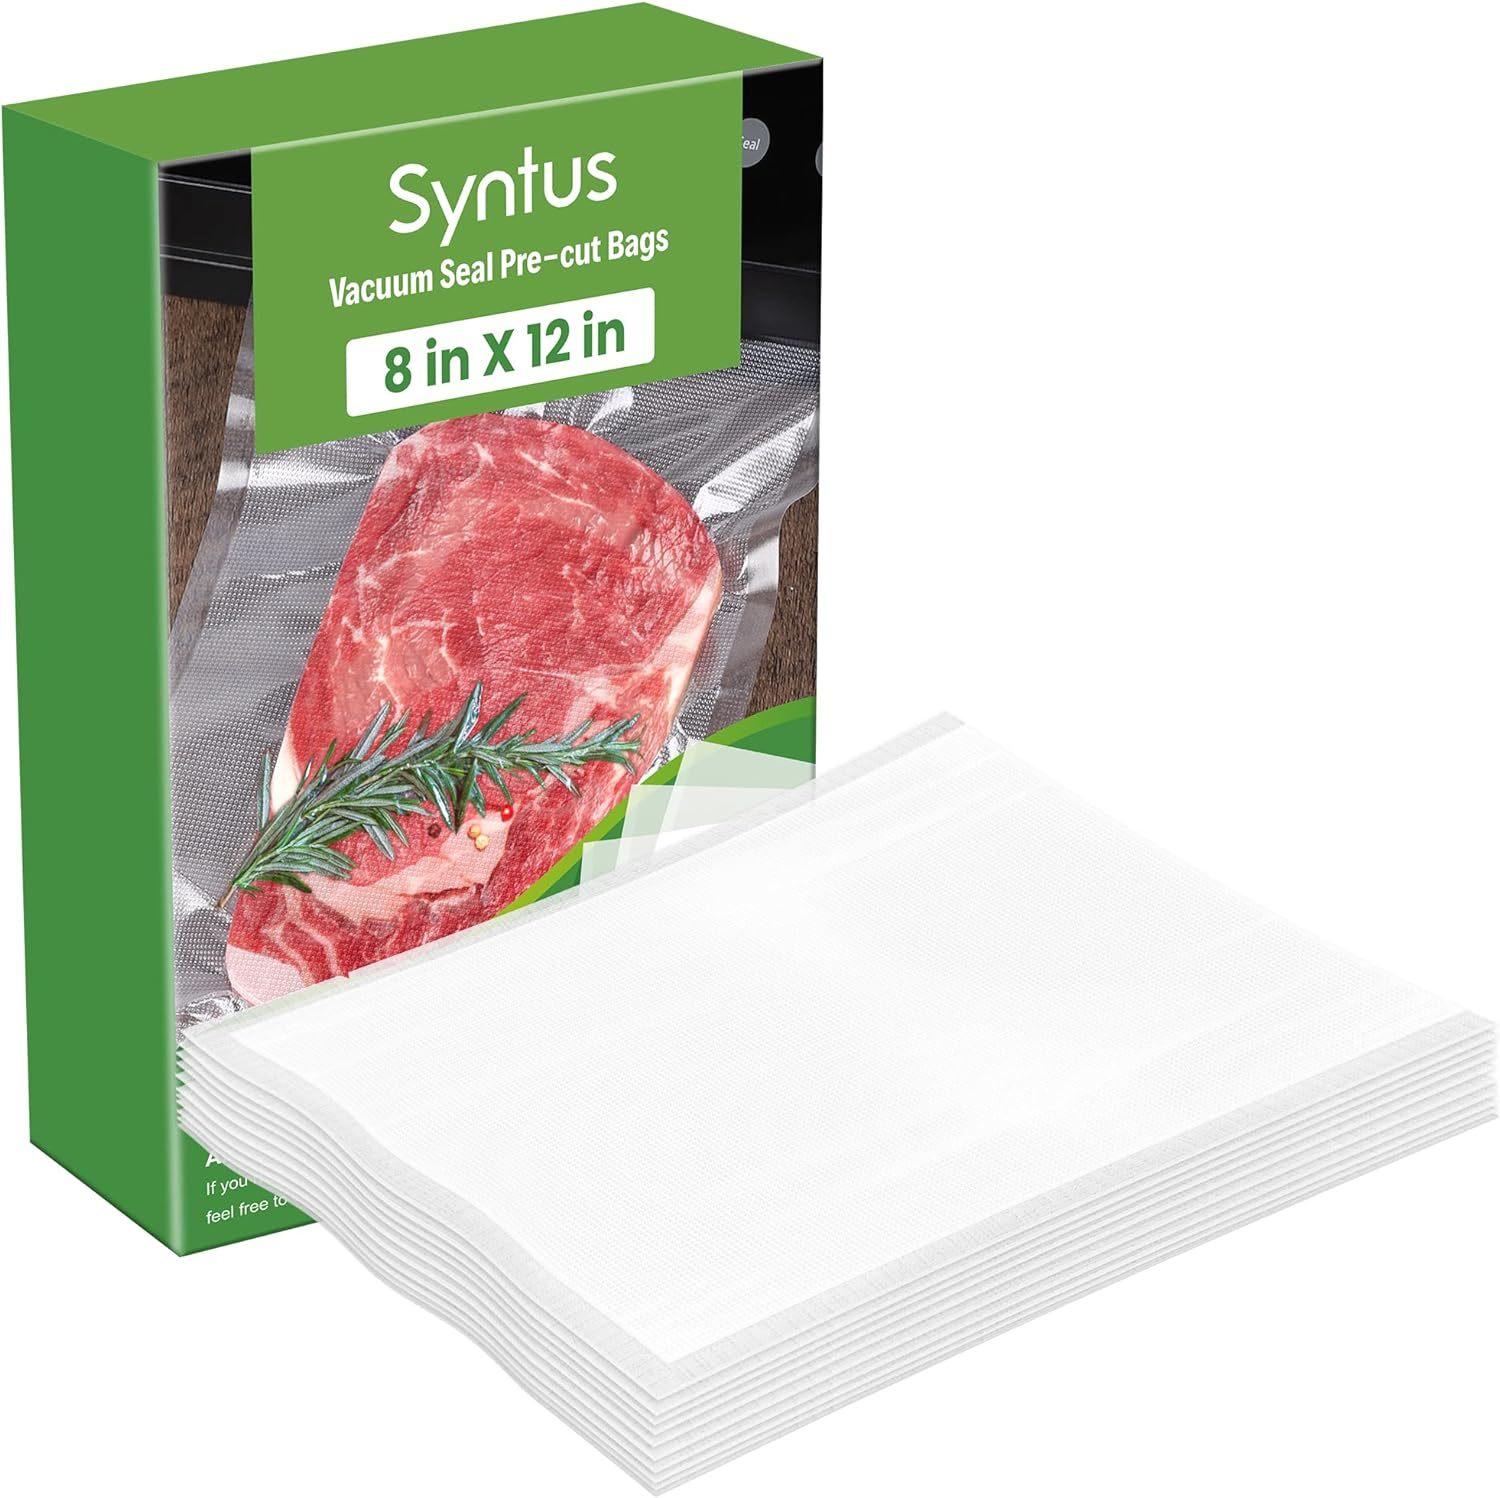 Syntus 100 Count Vacuum Sealer Bags Quart 8 x 12 inch for Seal a